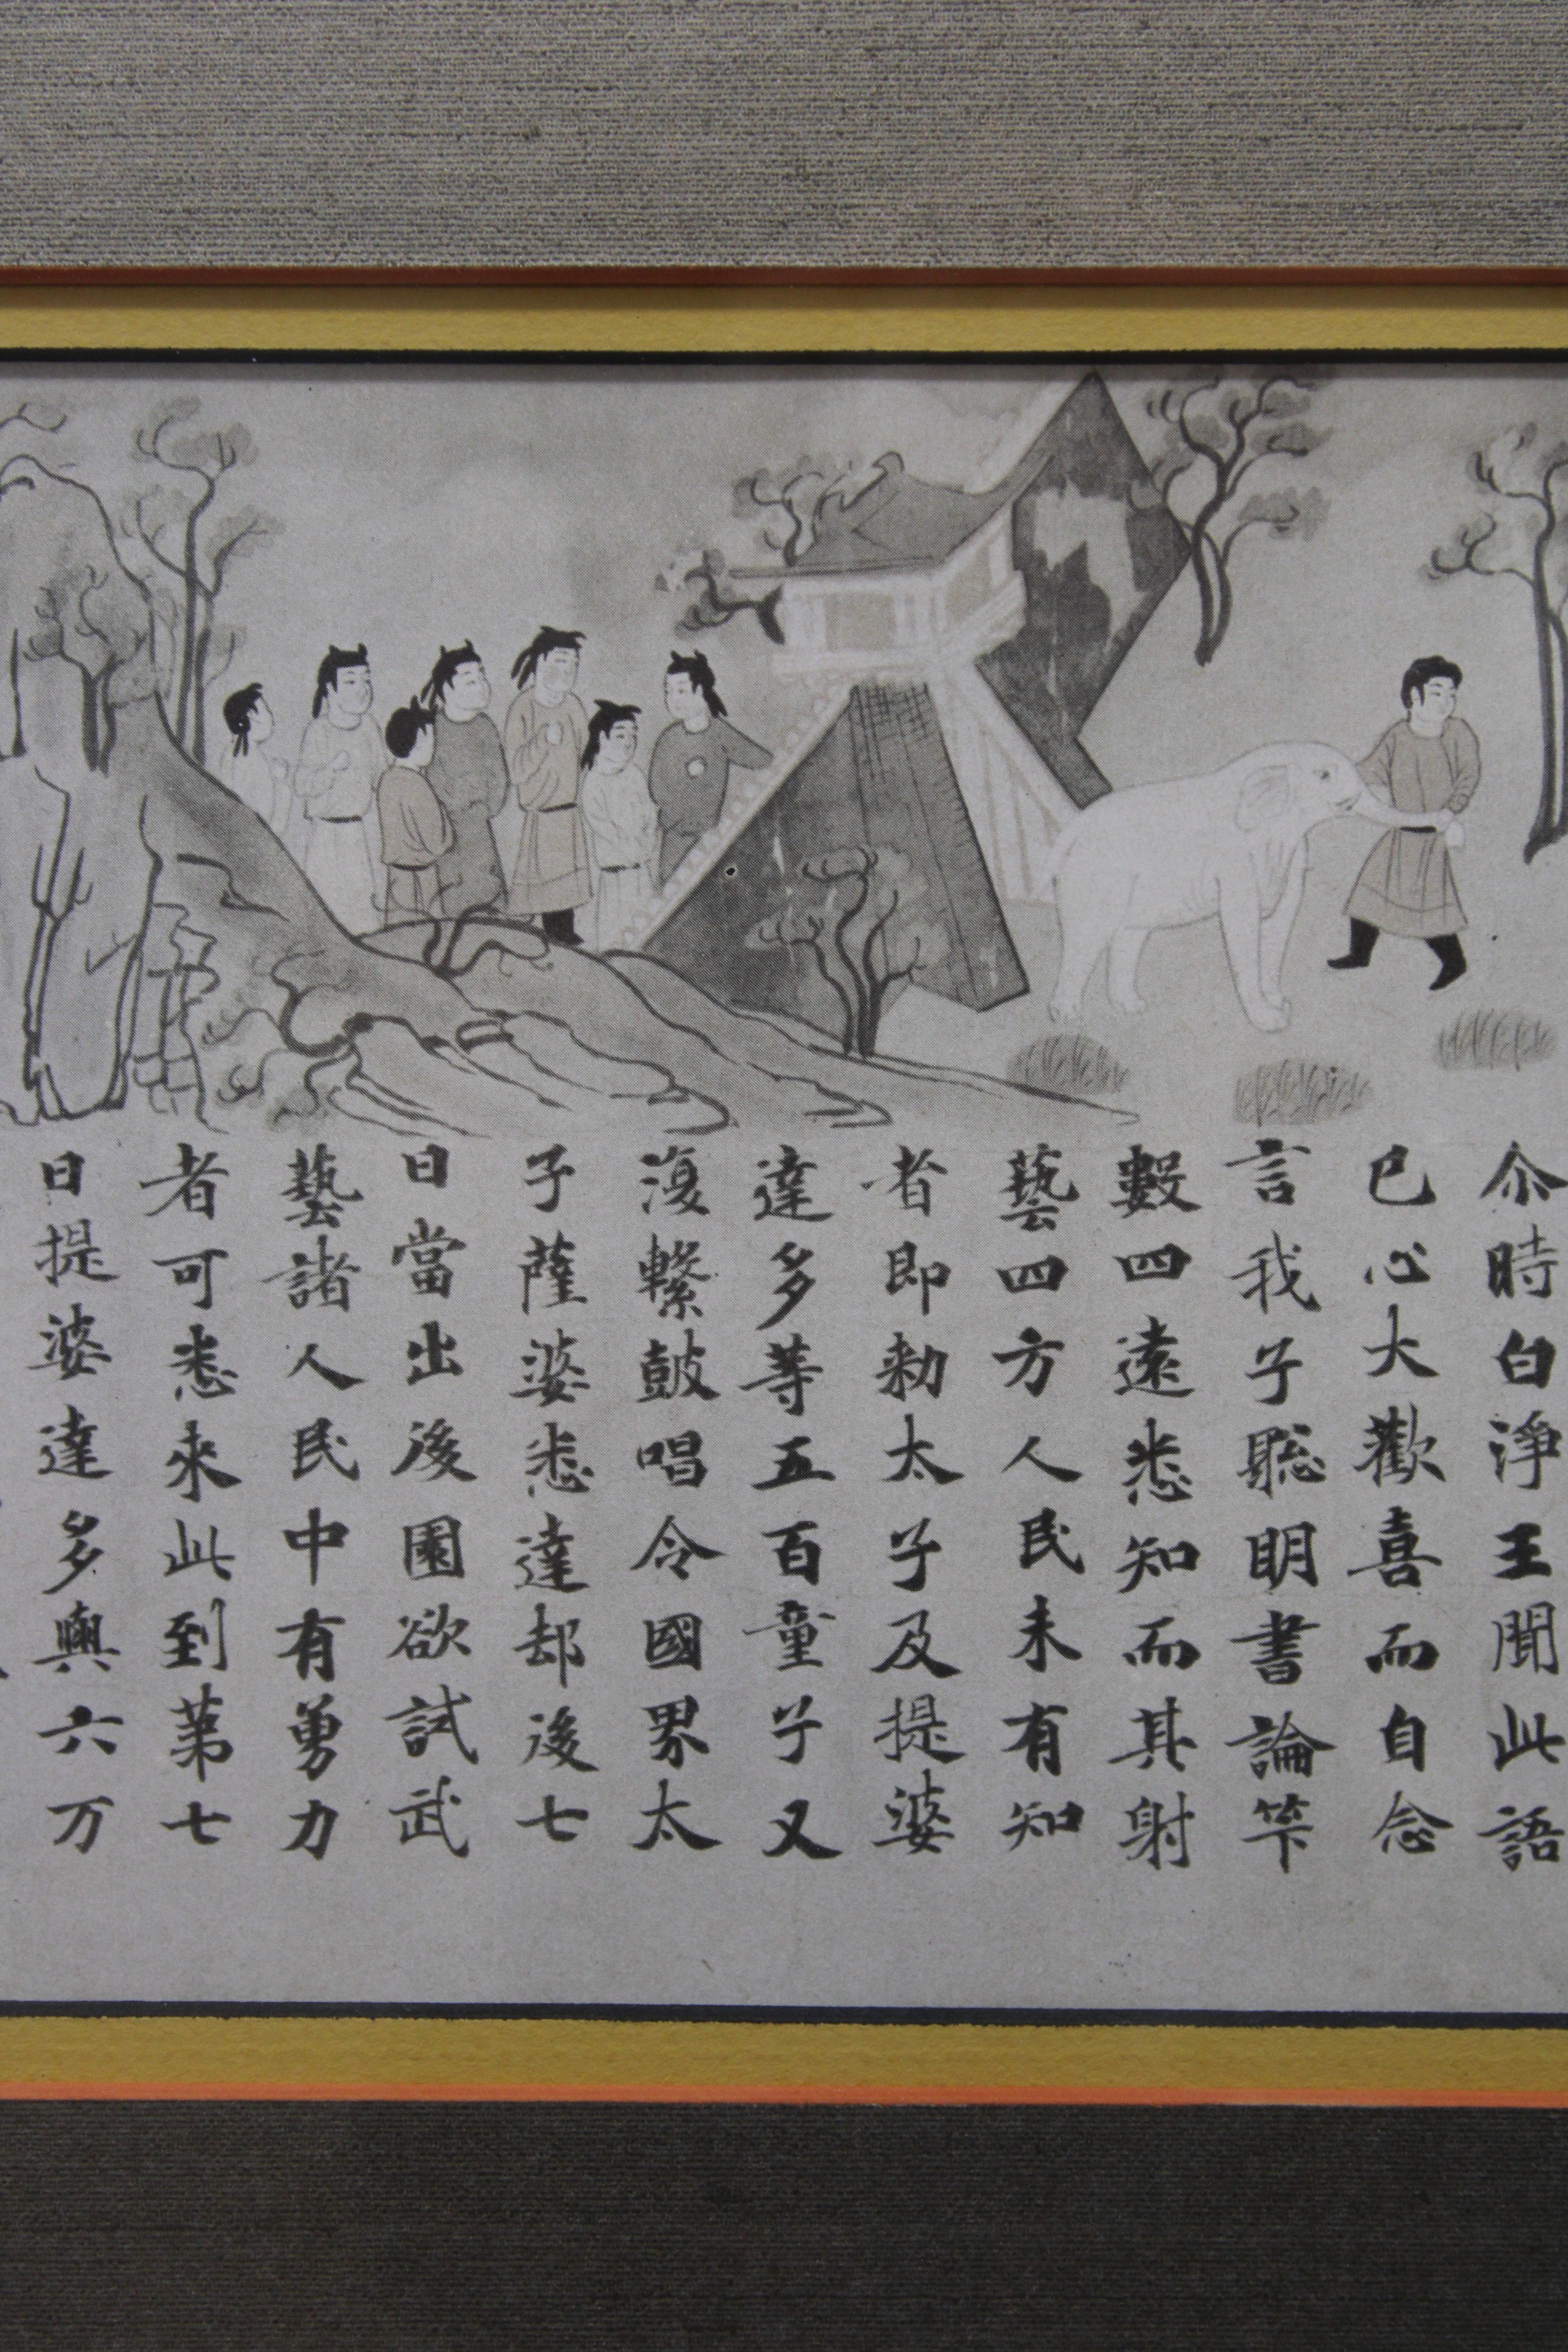 Framed Chinese Pictorial Poem 